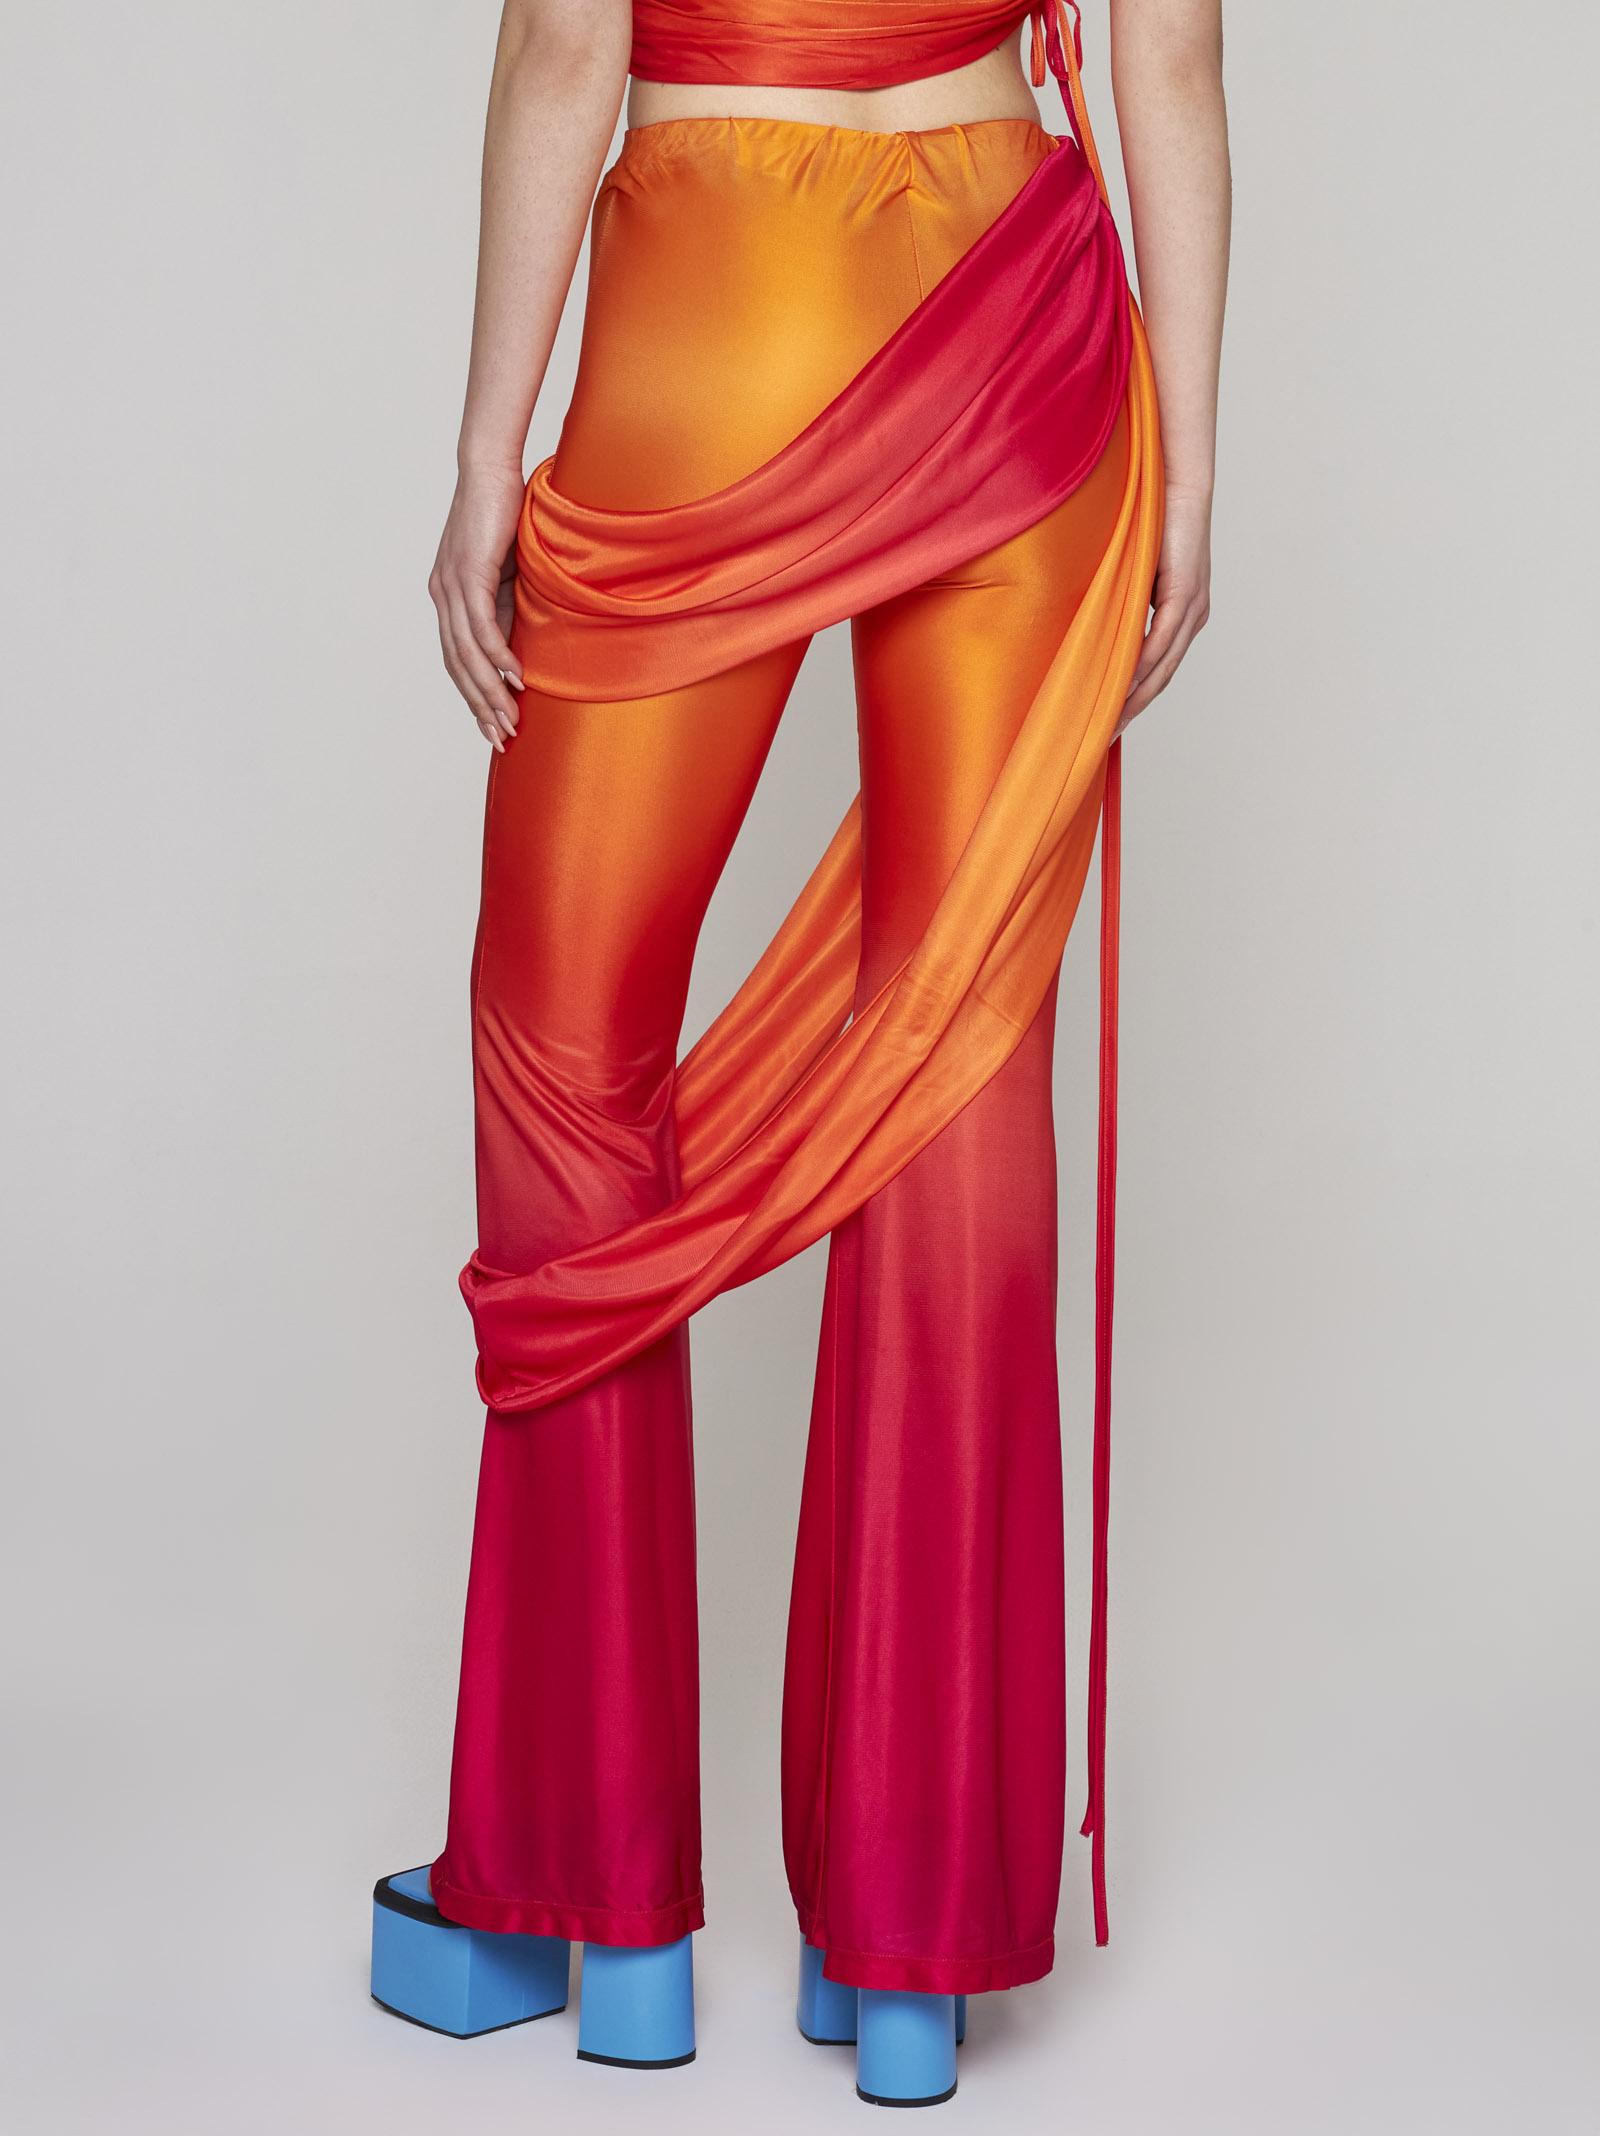 ANDREADAMO Draped Bands Jersey Flared Trousers in Orange | Lyst